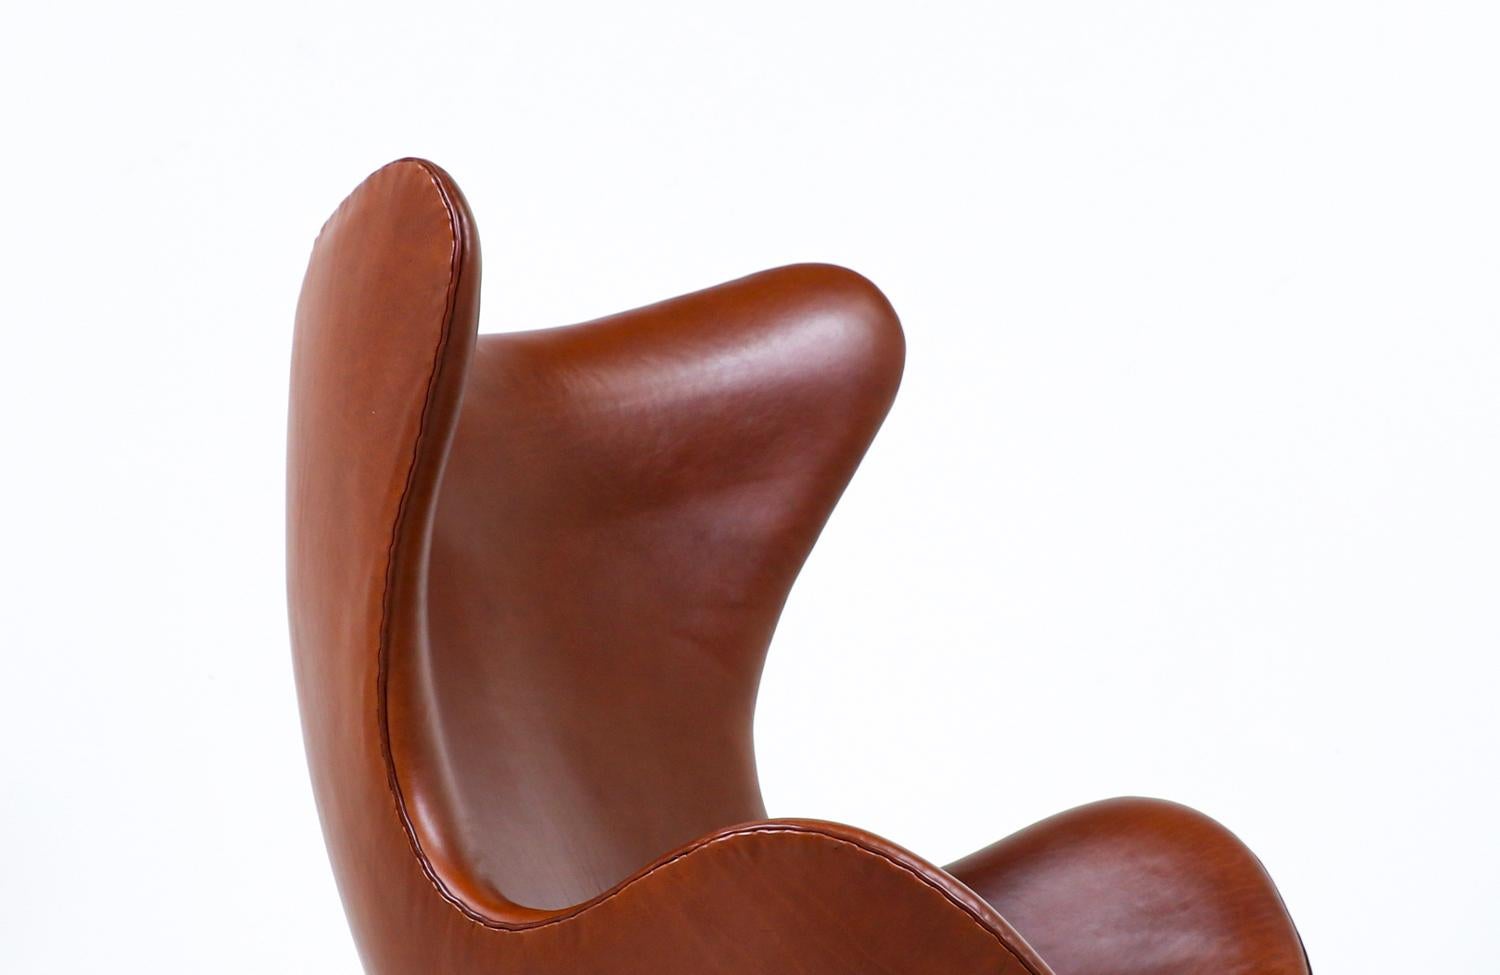 Expertly Restored - Danish Modern Cognac Leather “Egg” Chair by Arne Jacobsen For Sale 1